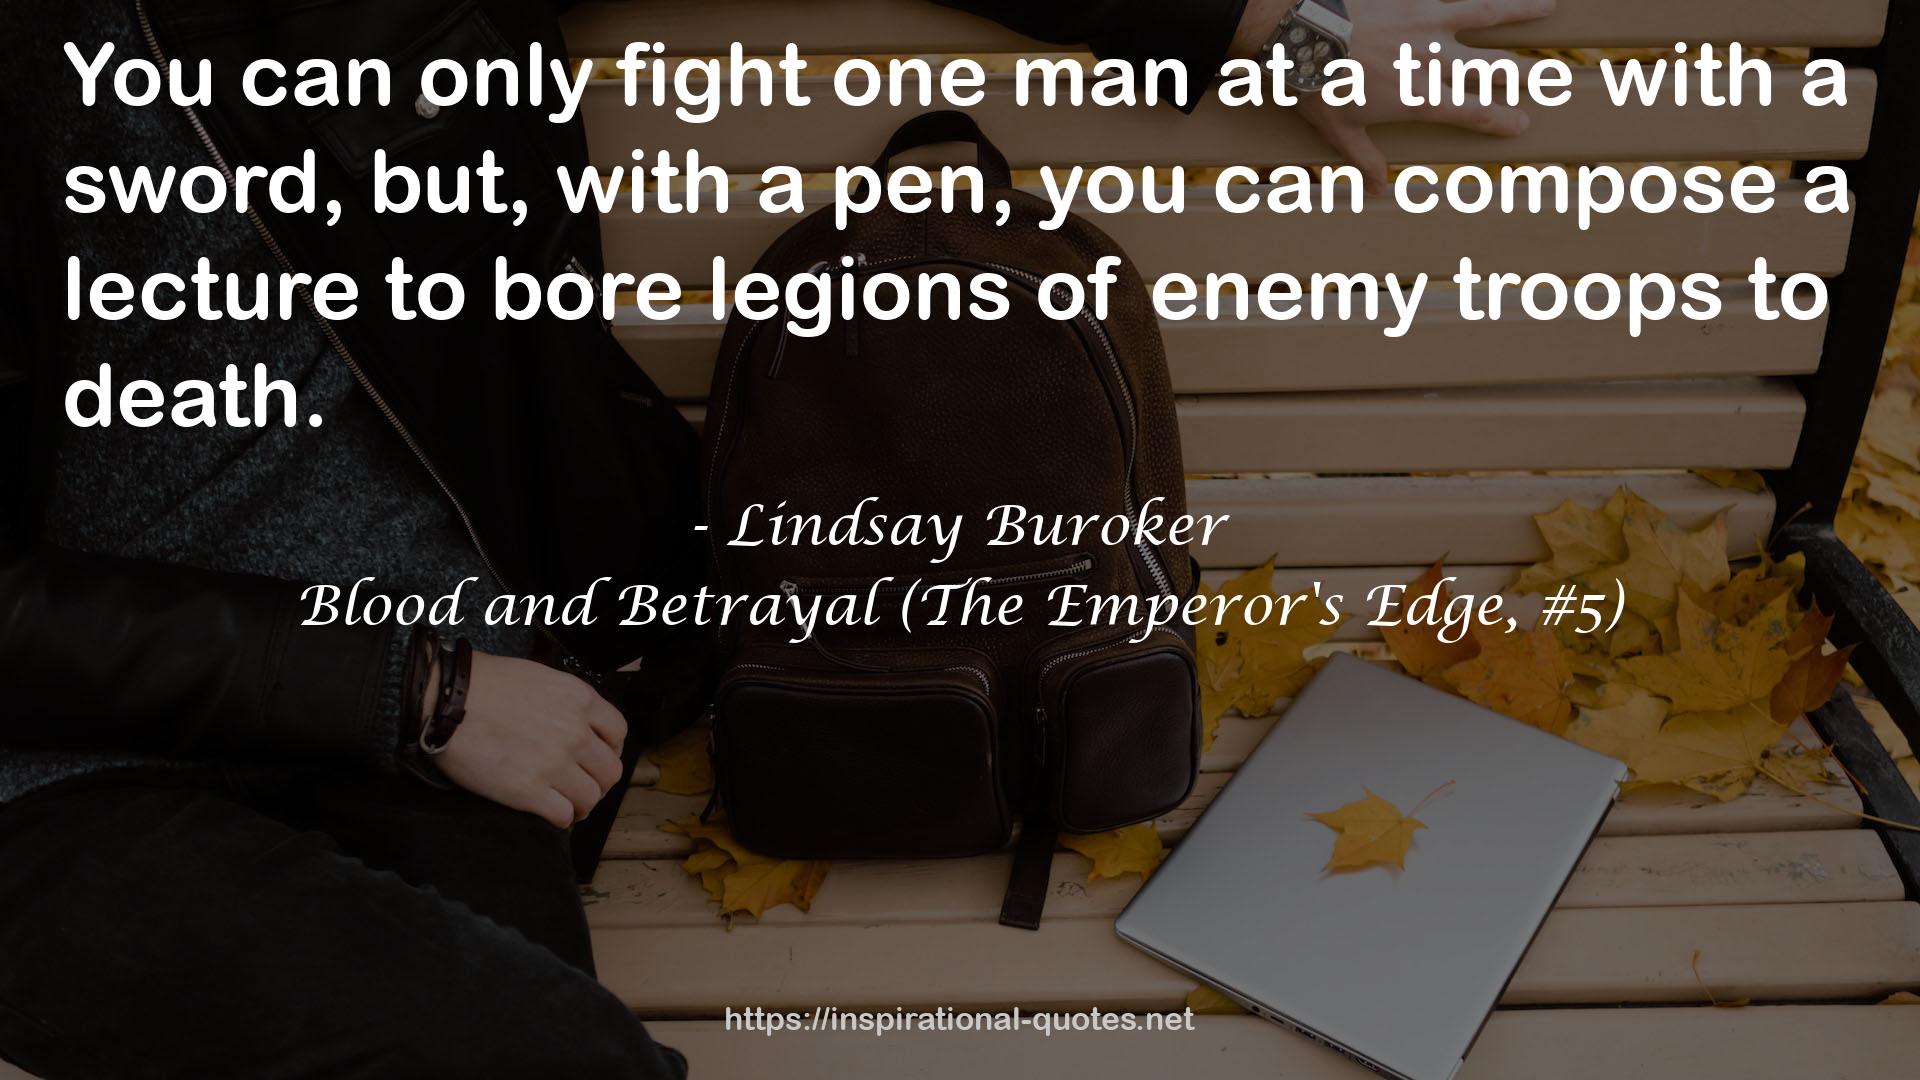 Blood and Betrayal (The Emperor's Edge, #5) QUOTES